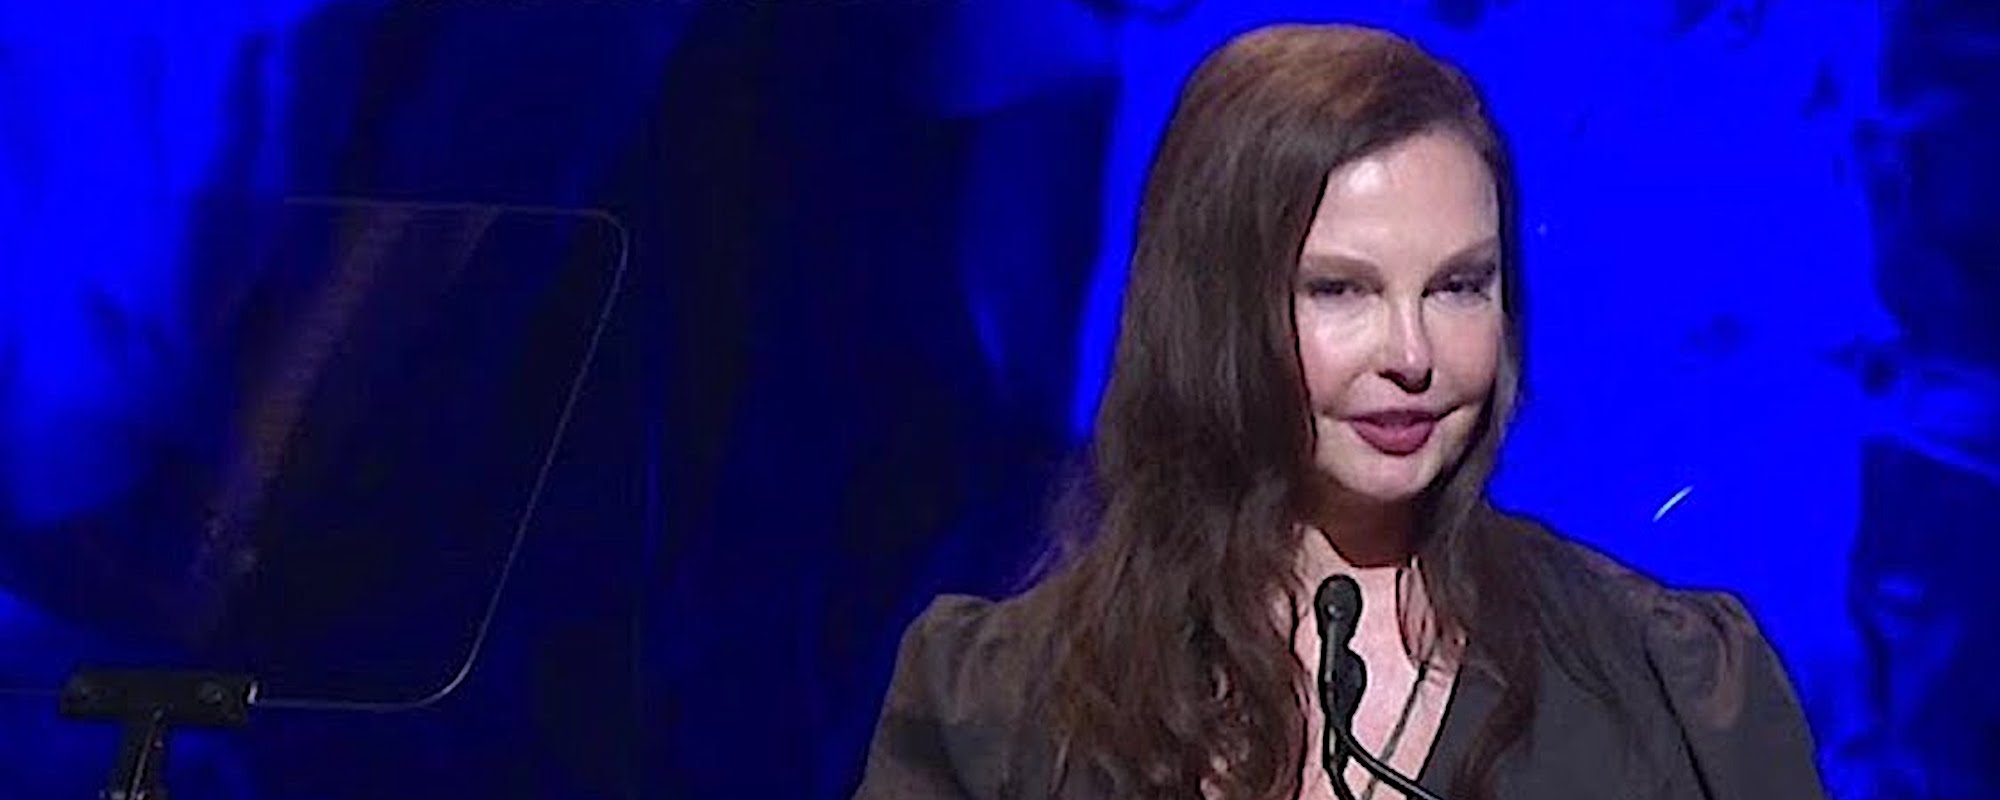 Ashley Judd Shares Touching Tribute to Mom Naomi: “Be Free, My Beautiful Mother.”